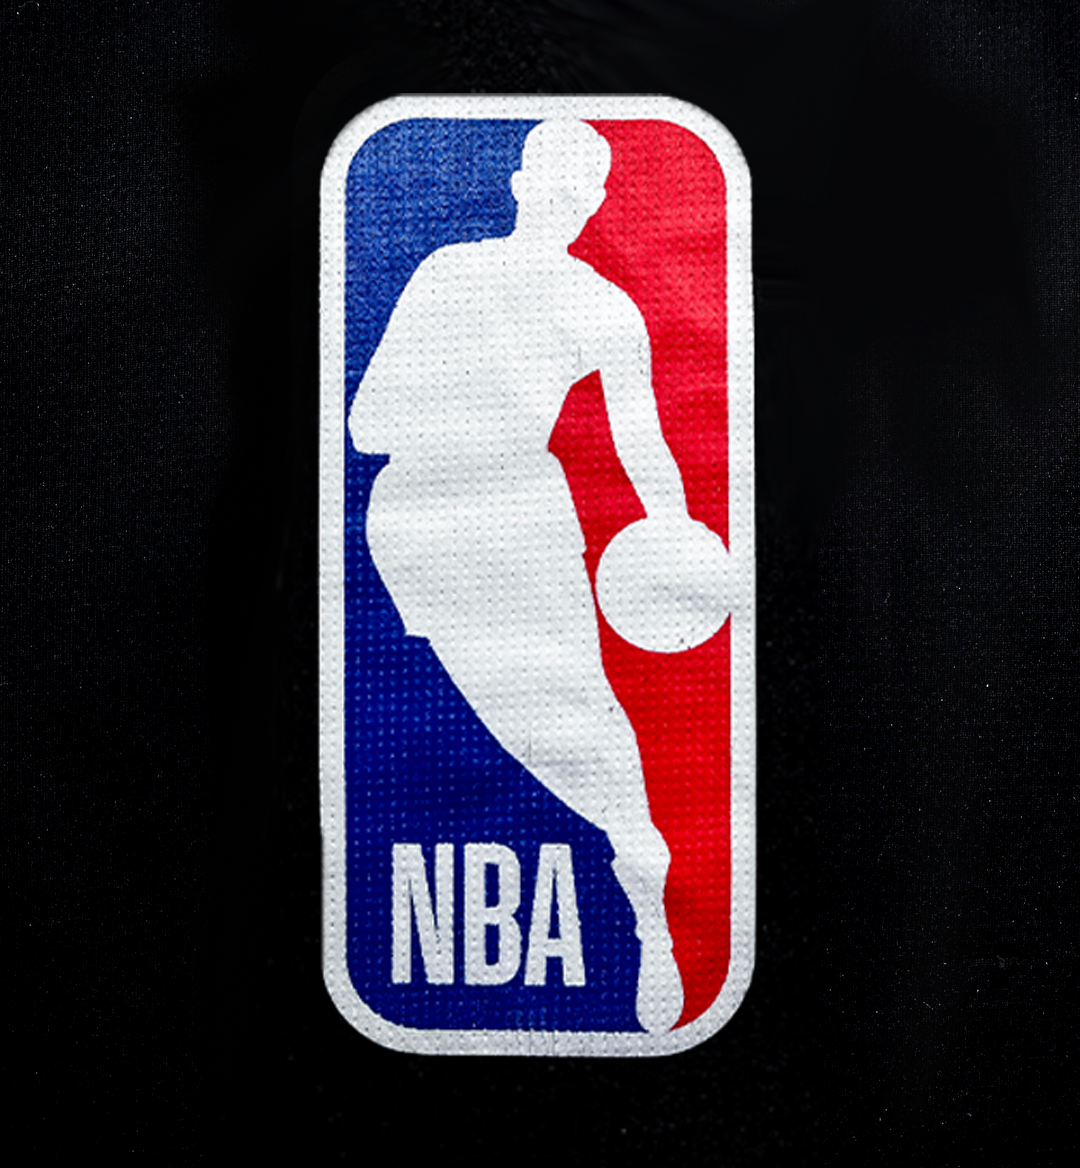 Who Is The NBA Logo?